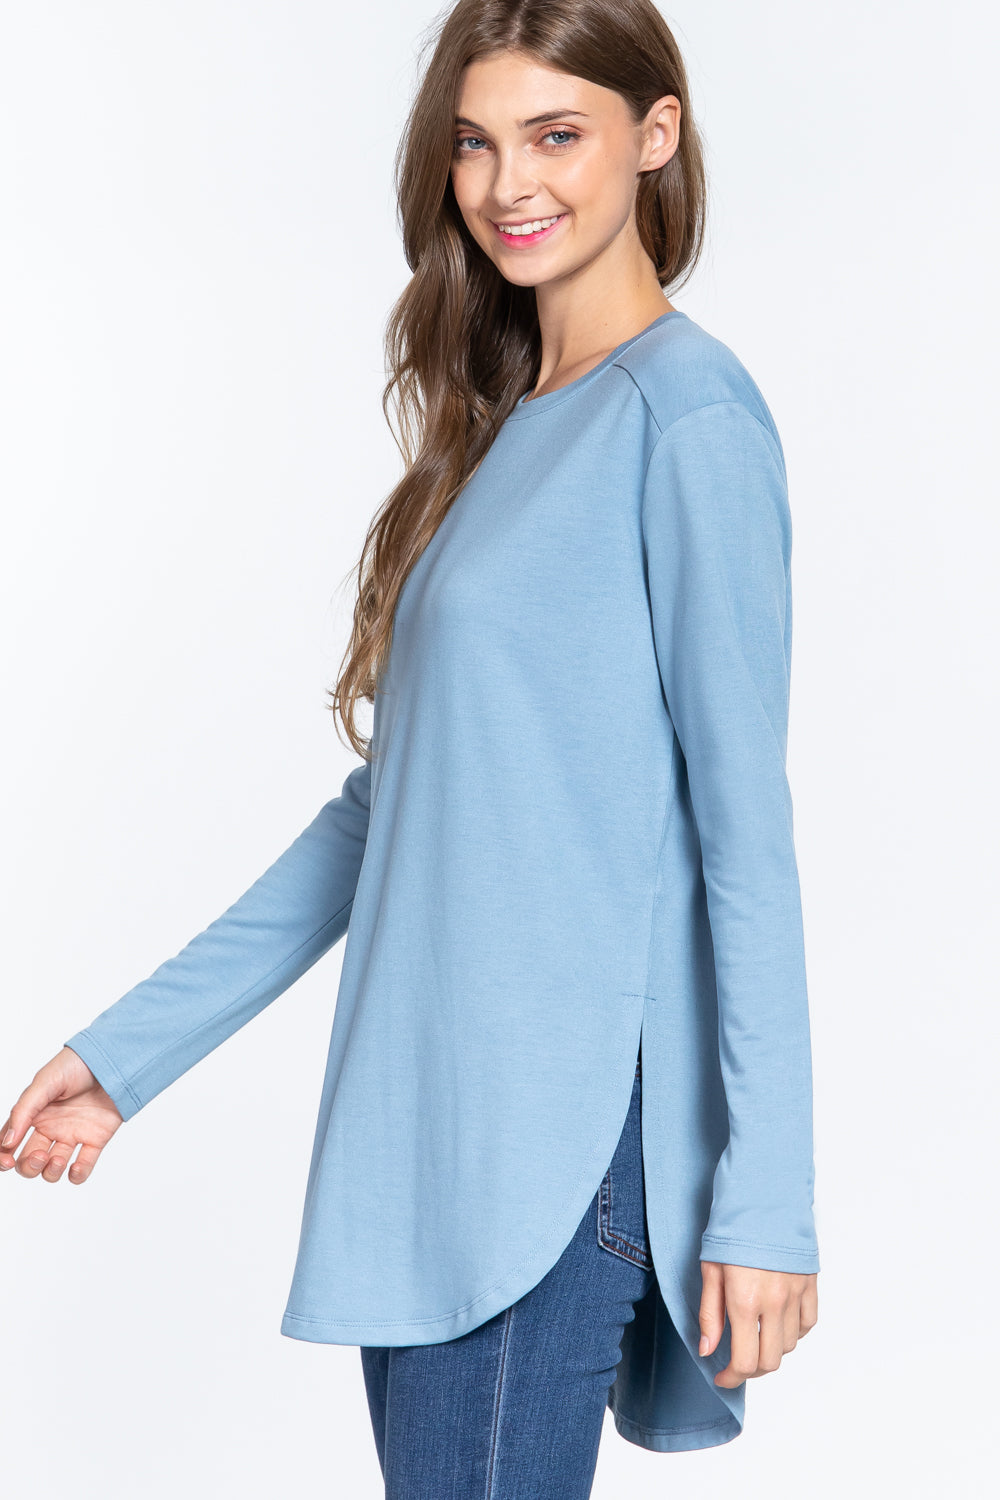 Long Sleeve Side Slit French Terry Tunic in Blue - Tigbul's Fashion